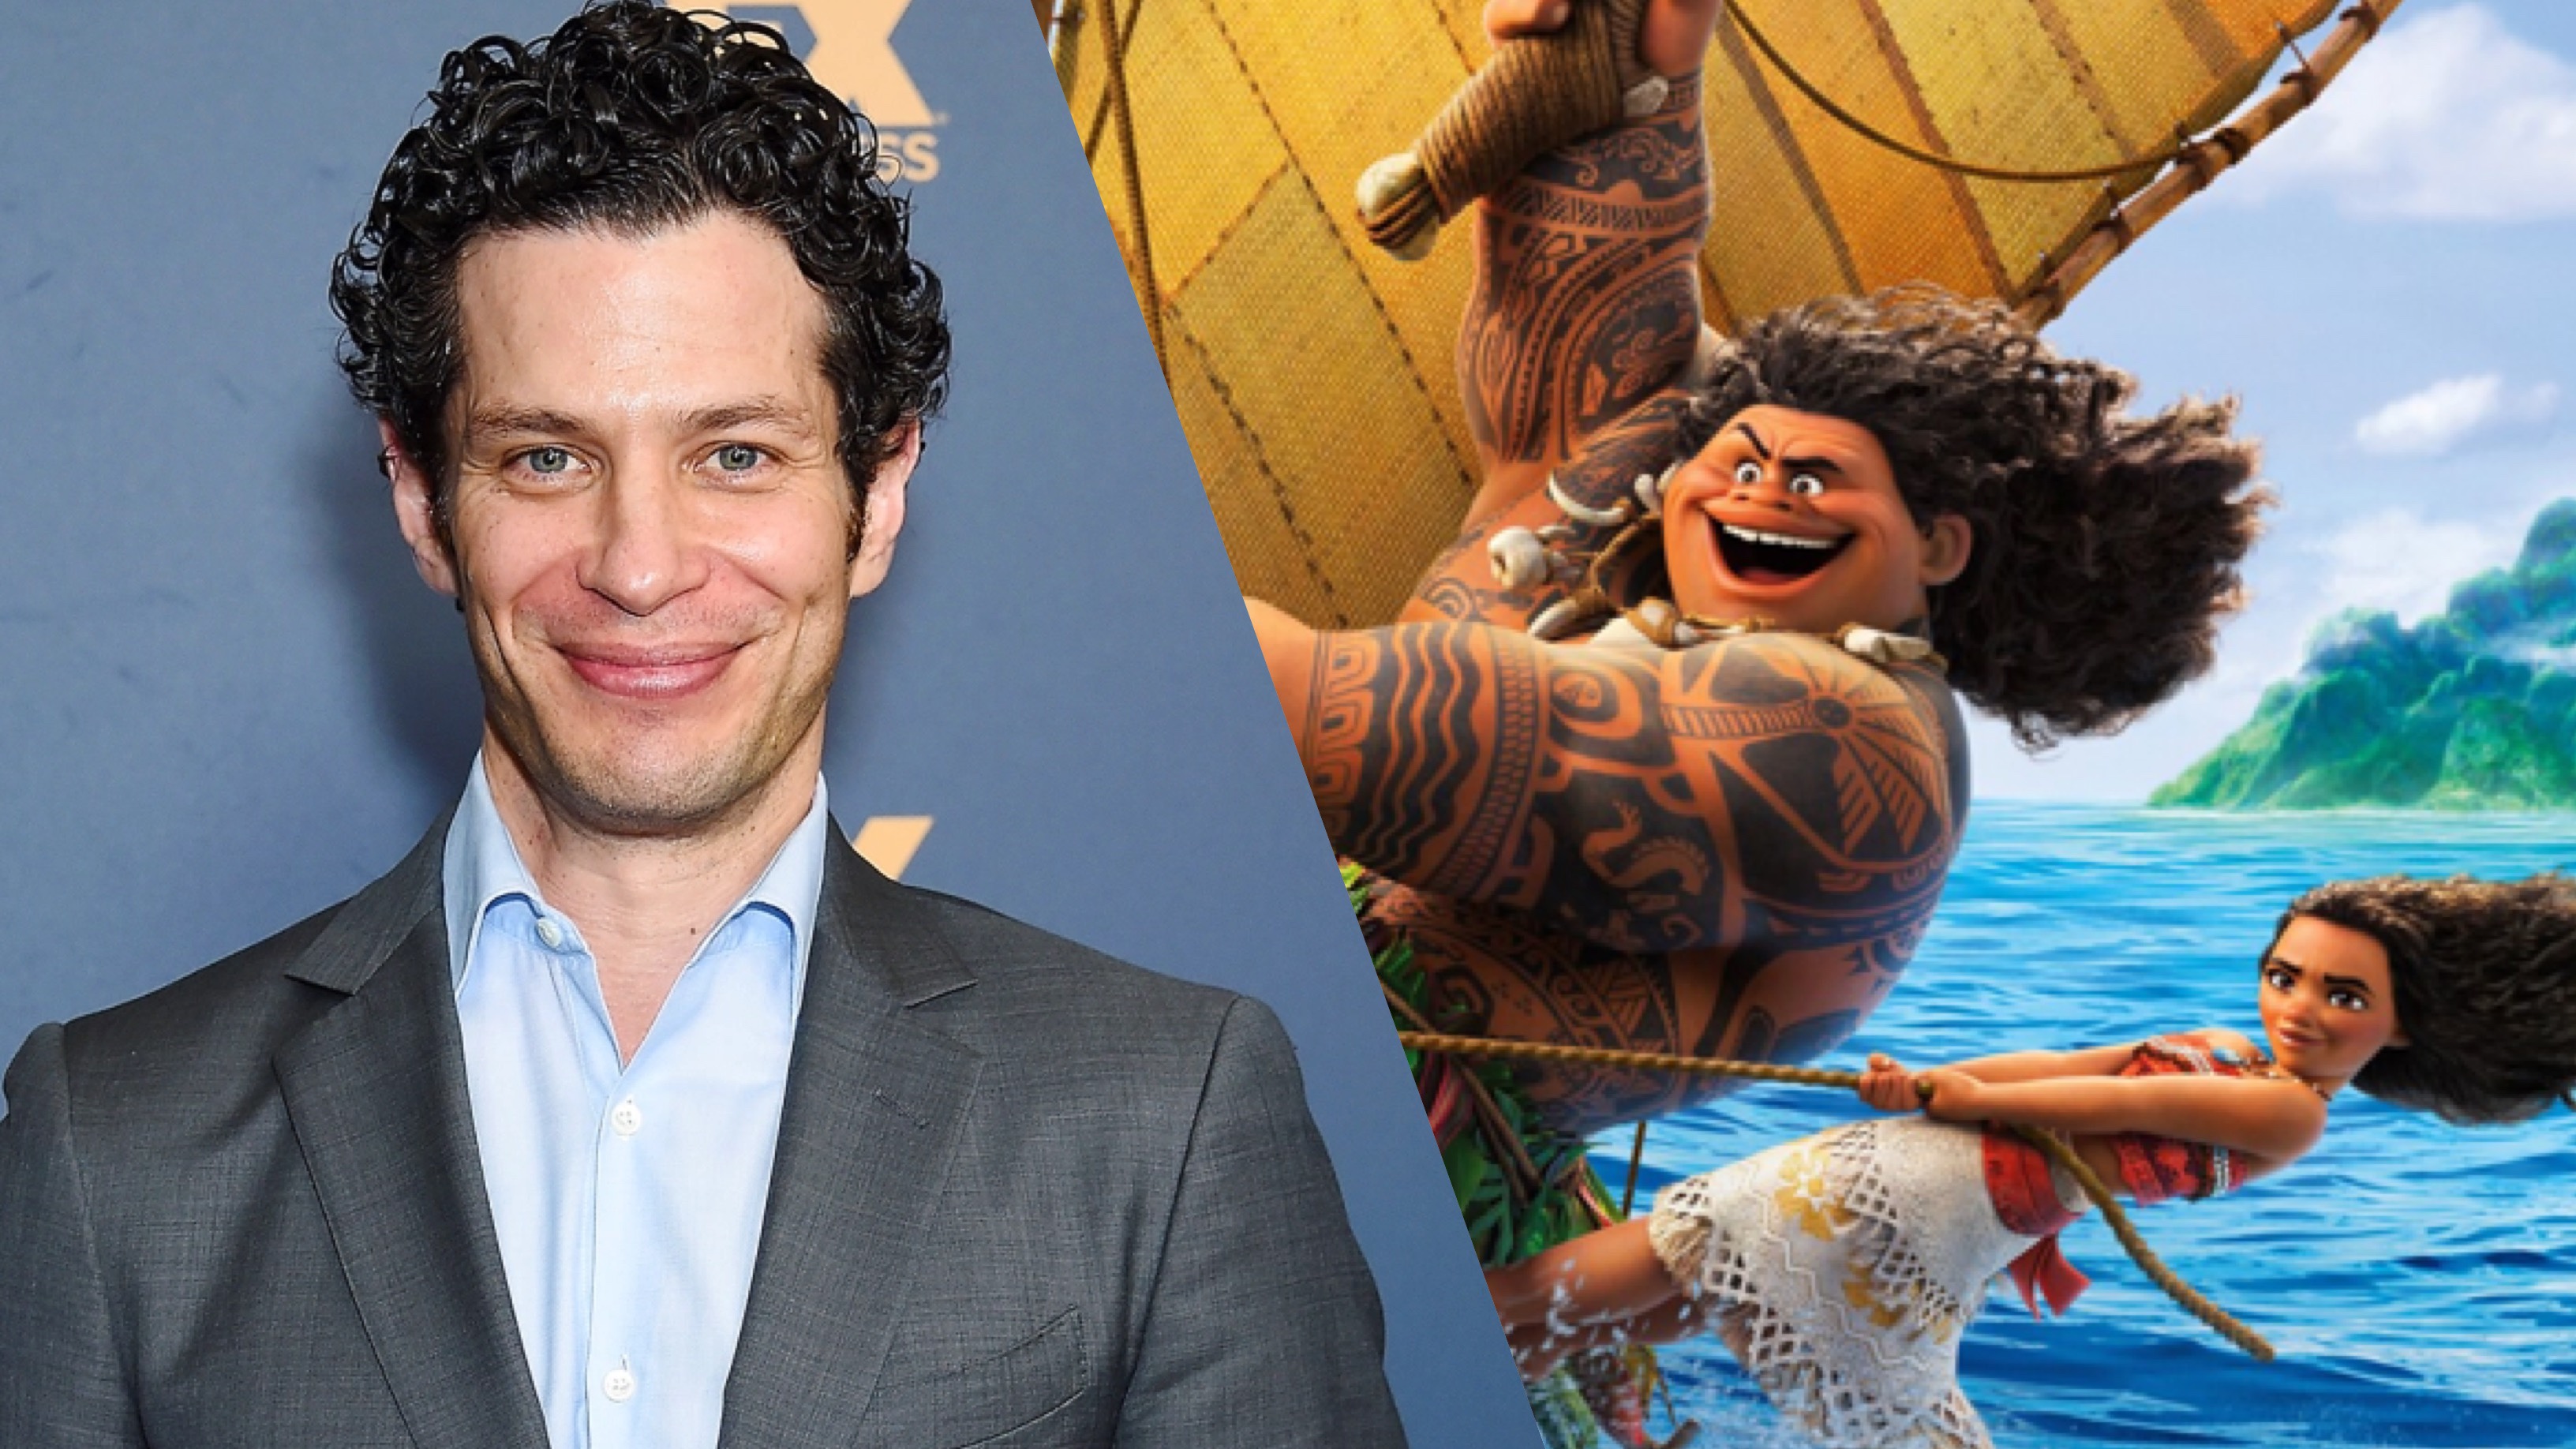 Moana Live-Action Movie Officially Confirmed: Everything We Know